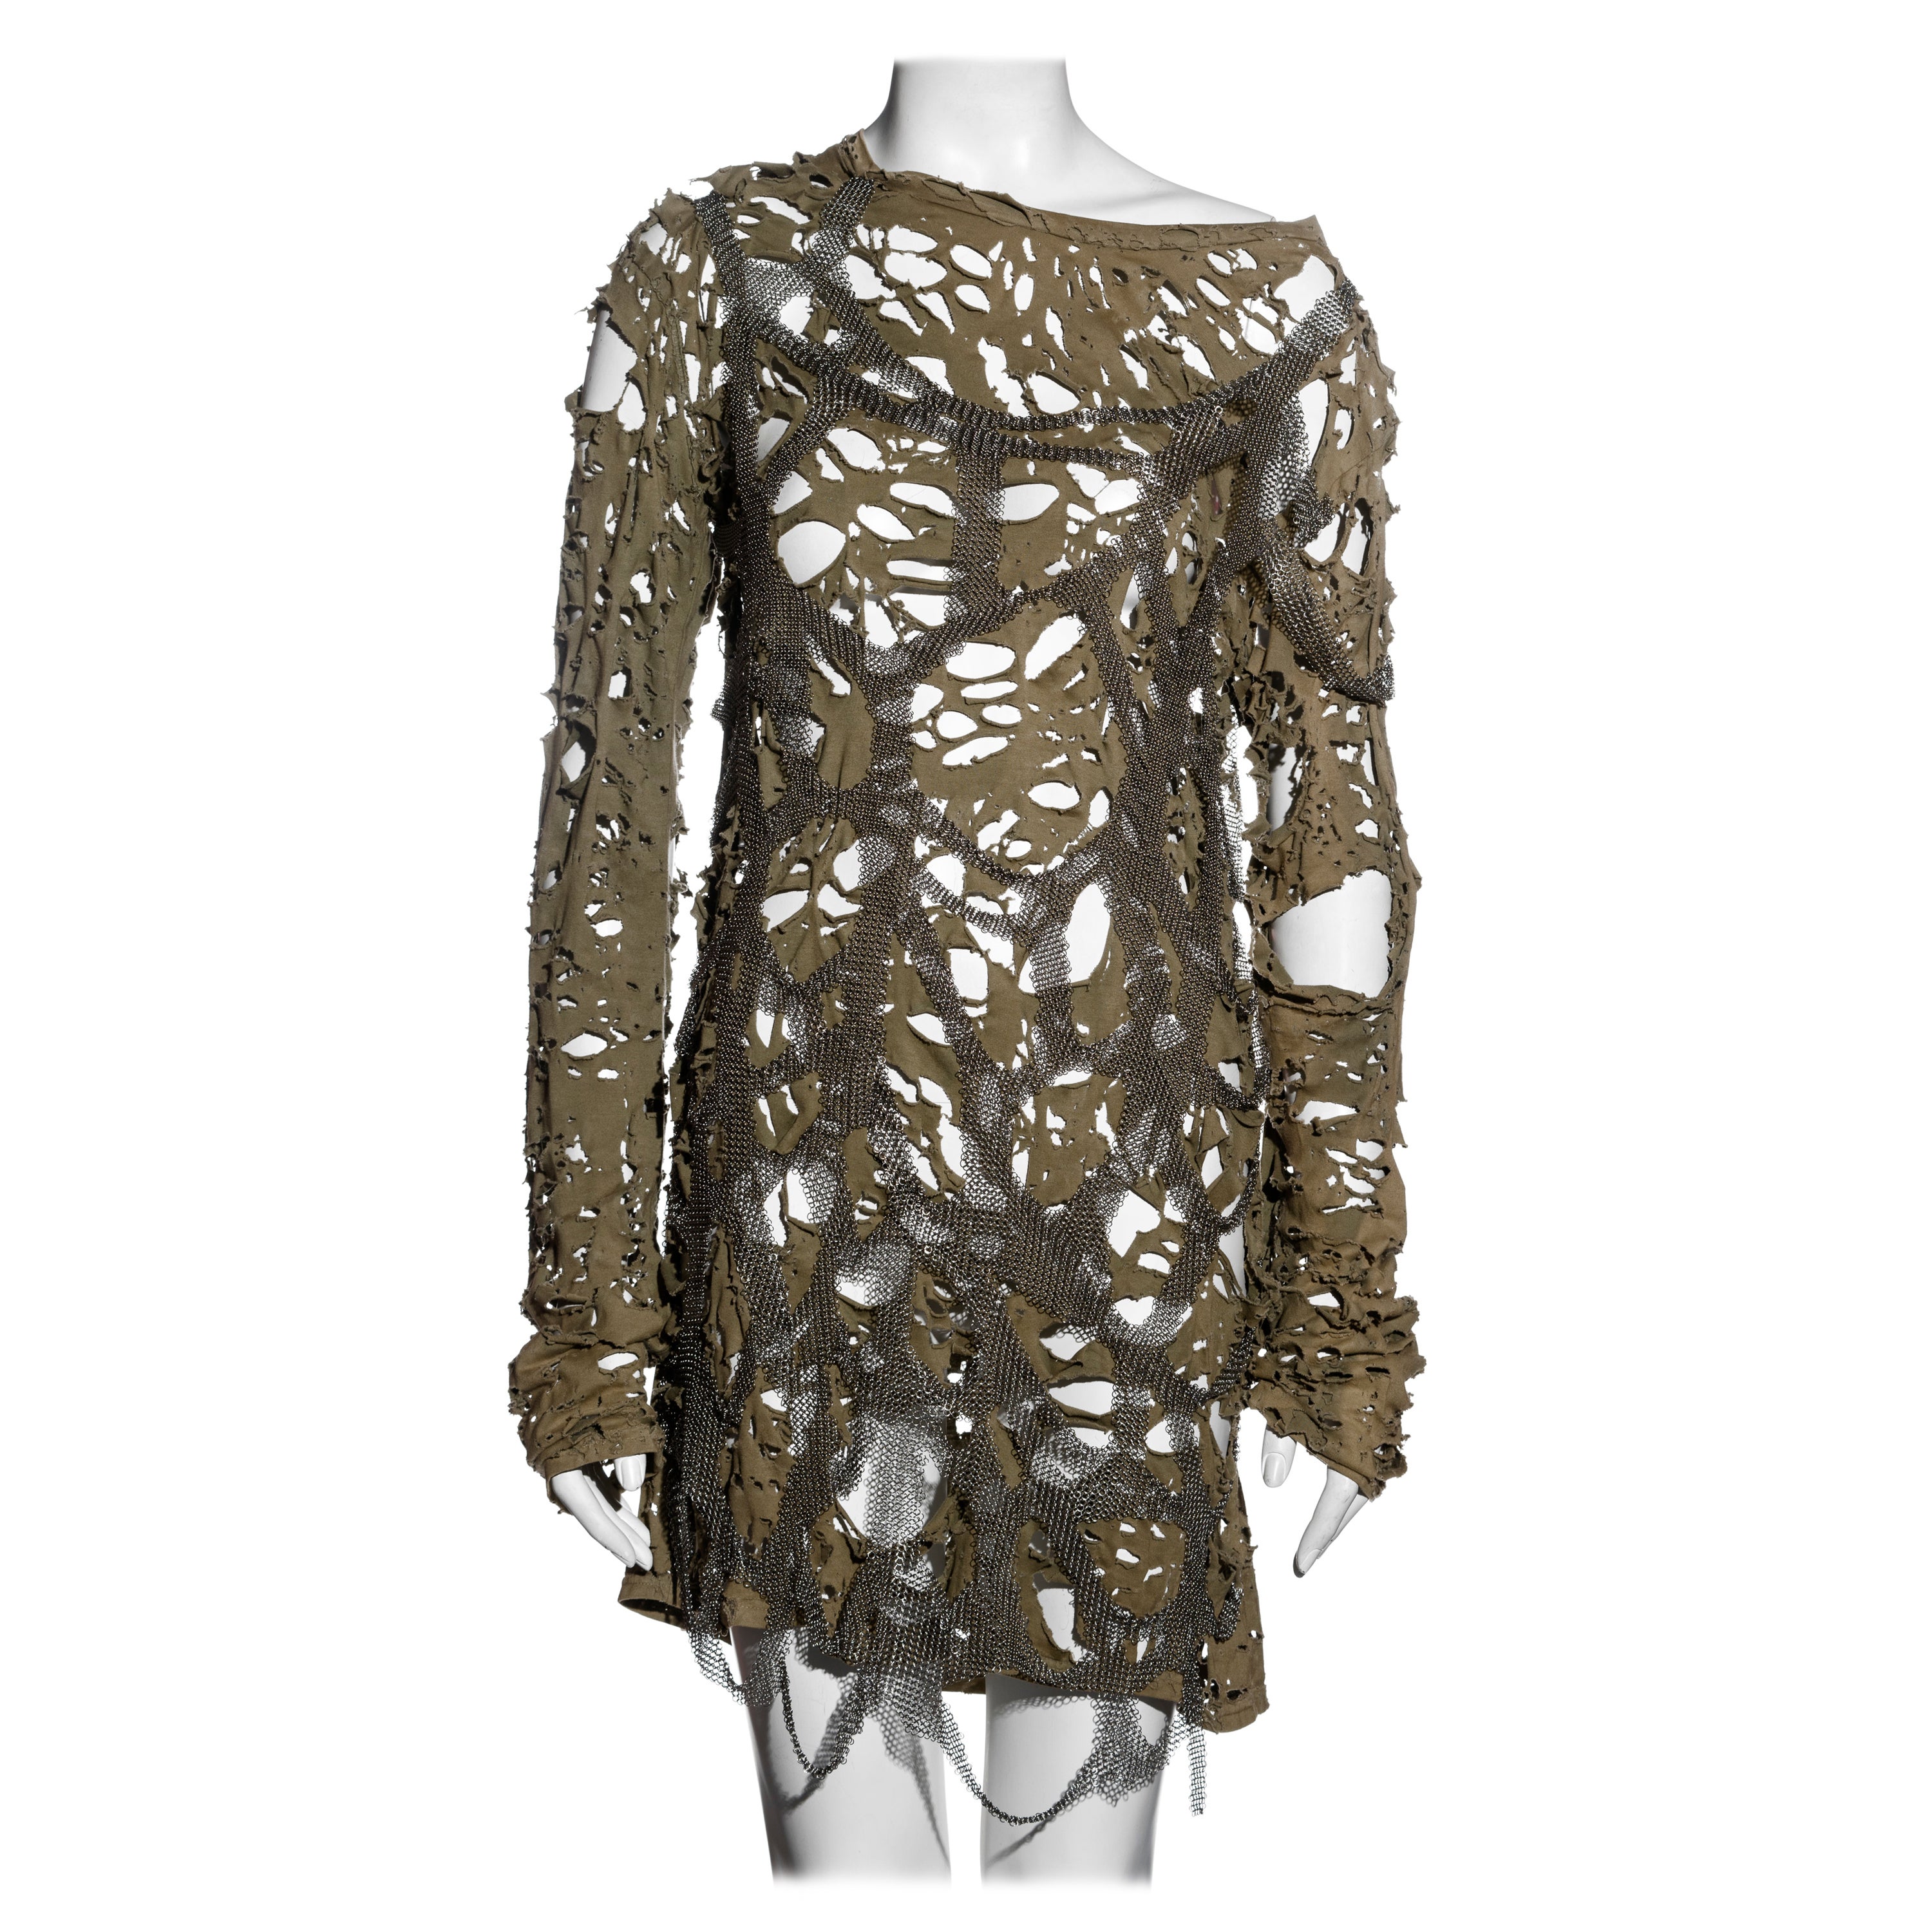 Balmain by Christophe Decarnin destroyed jersey and metal mini dress, ss 2010 For Sale